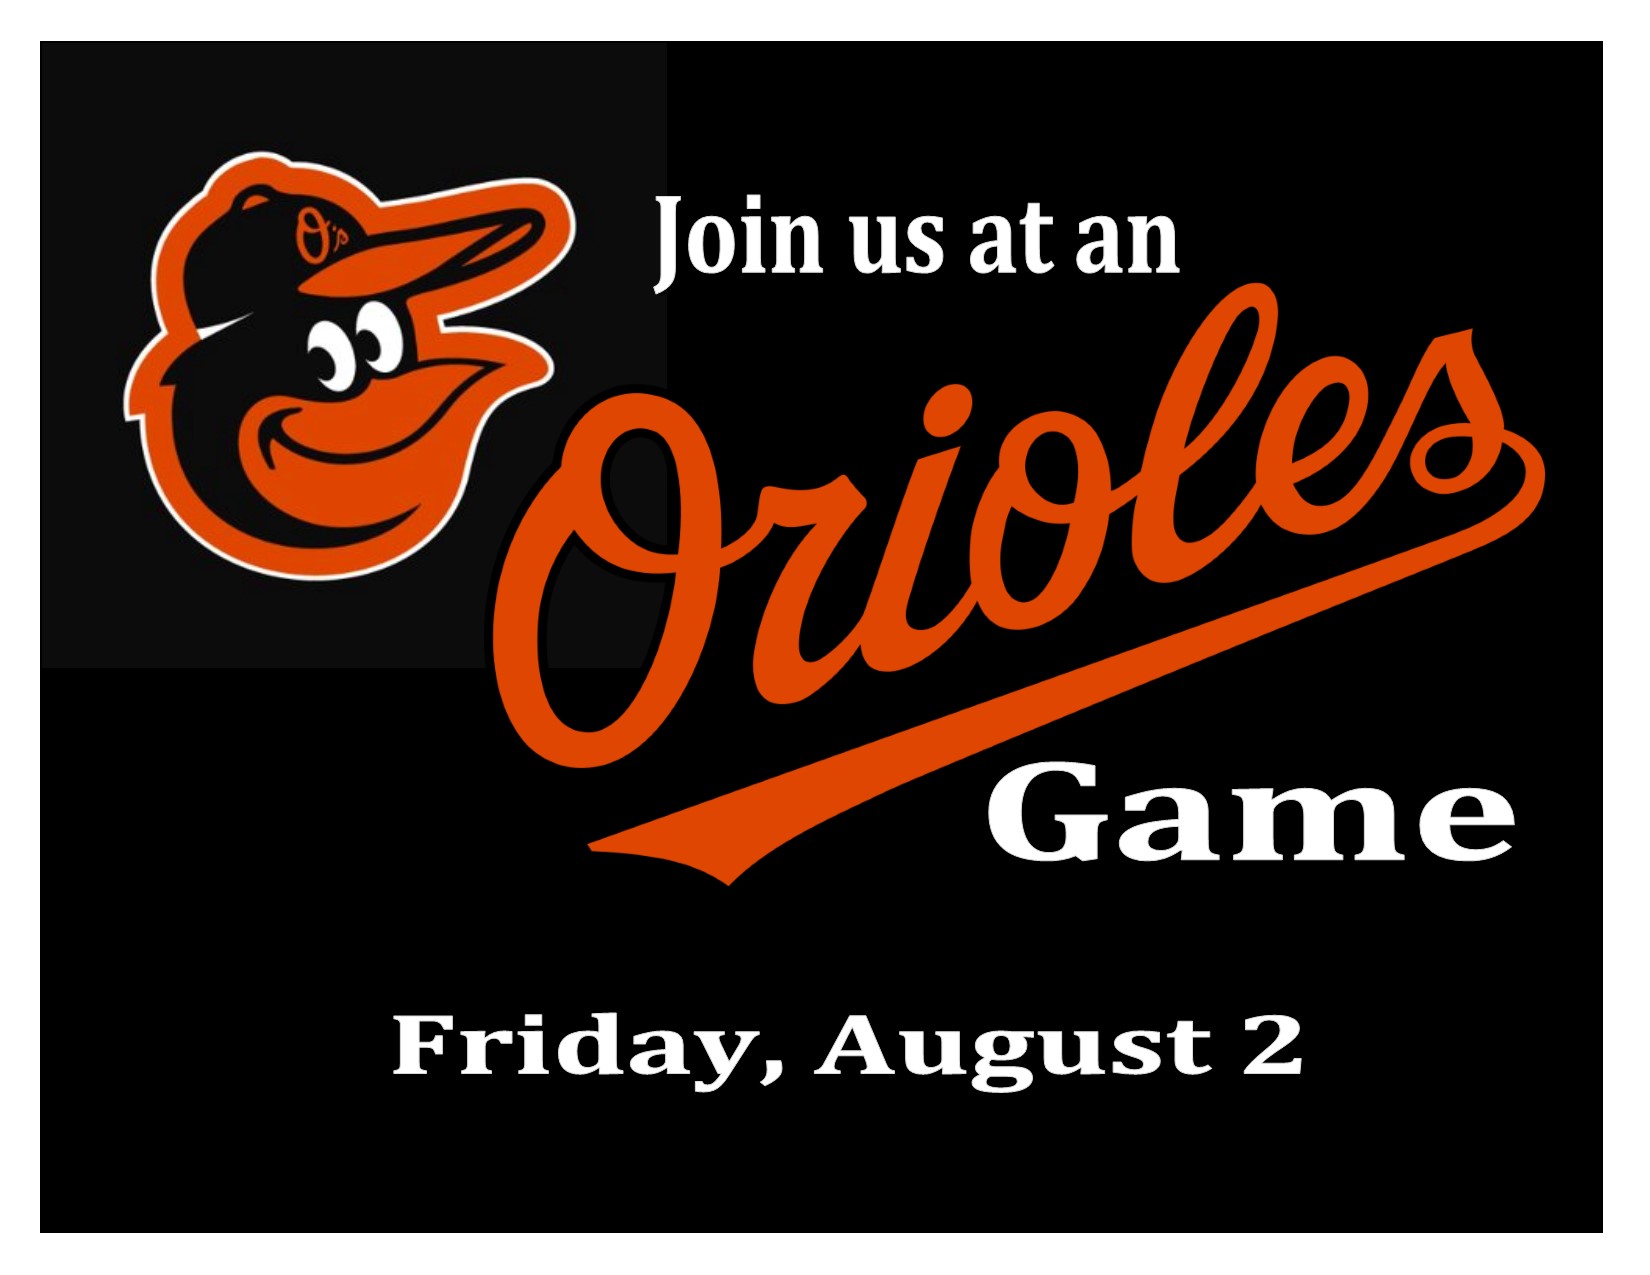 Orioles Game 2019 image